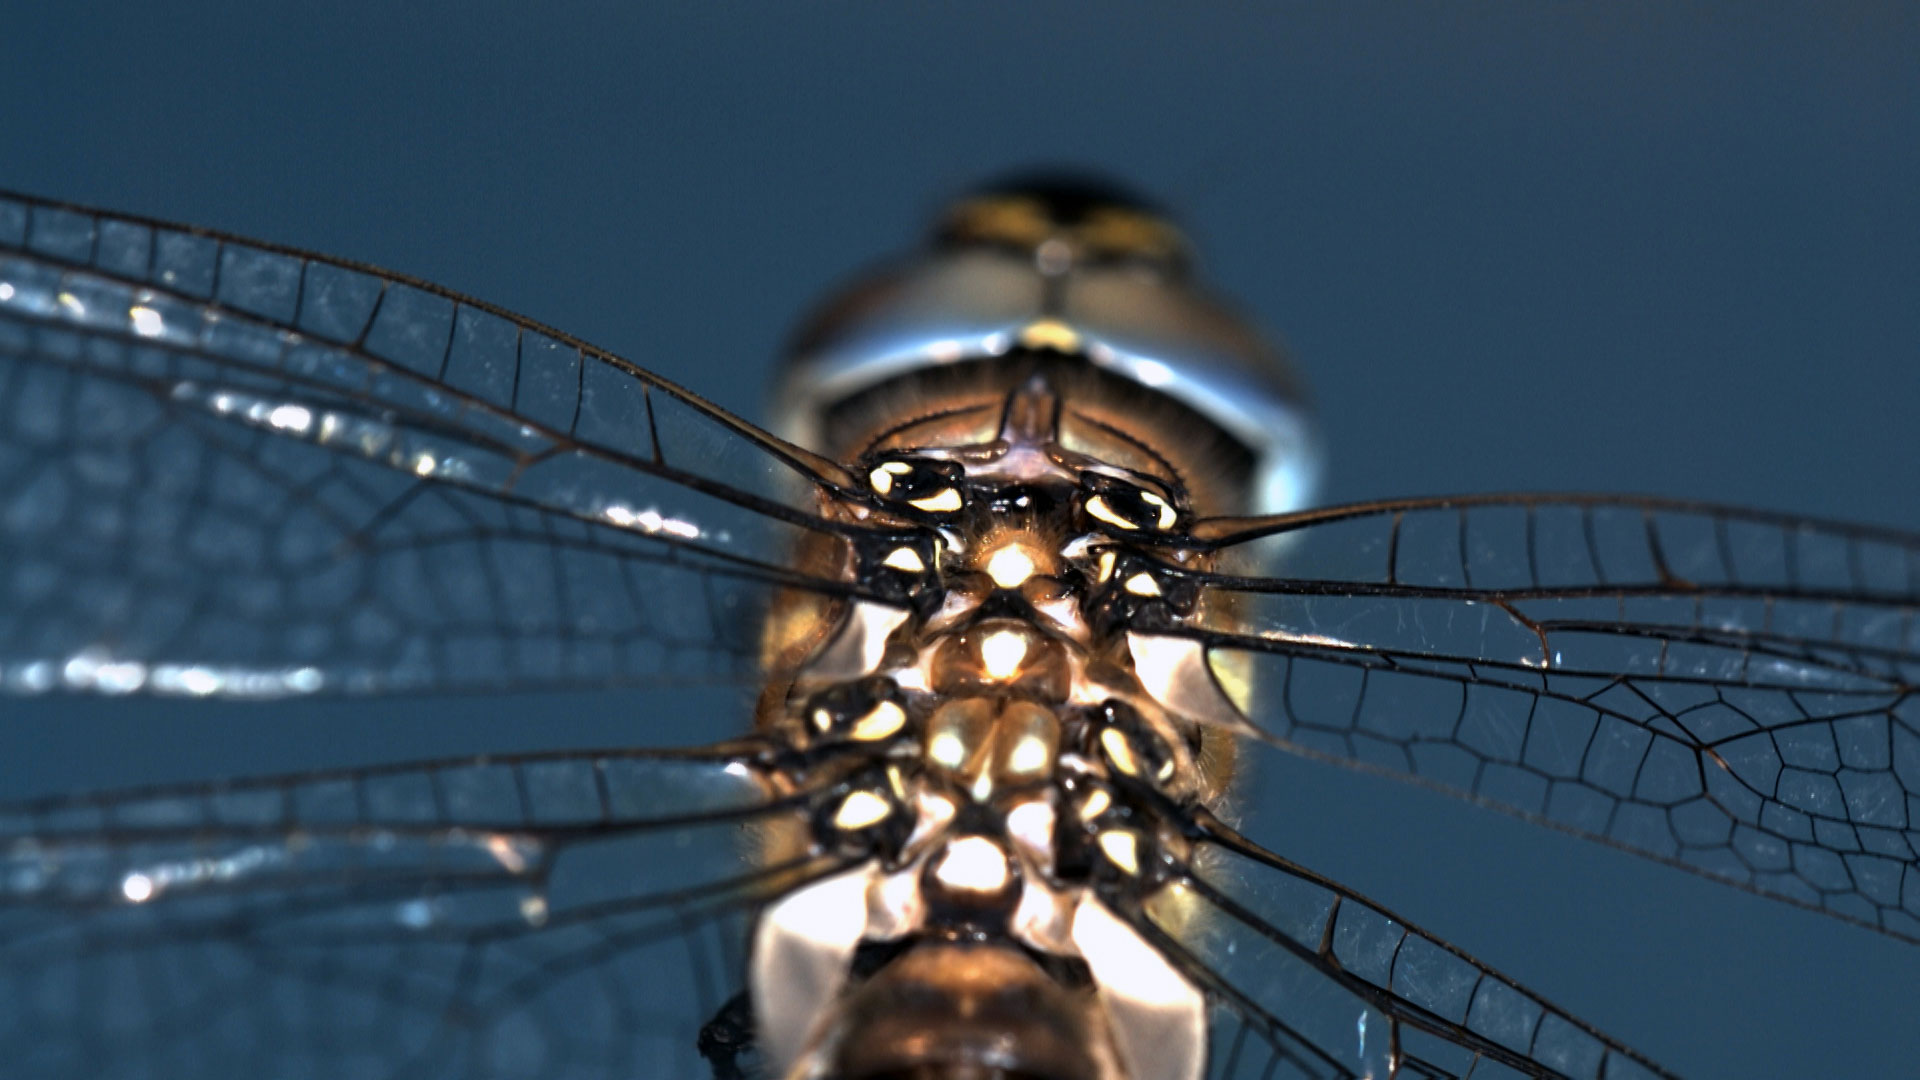 up close view of a Dragon fly